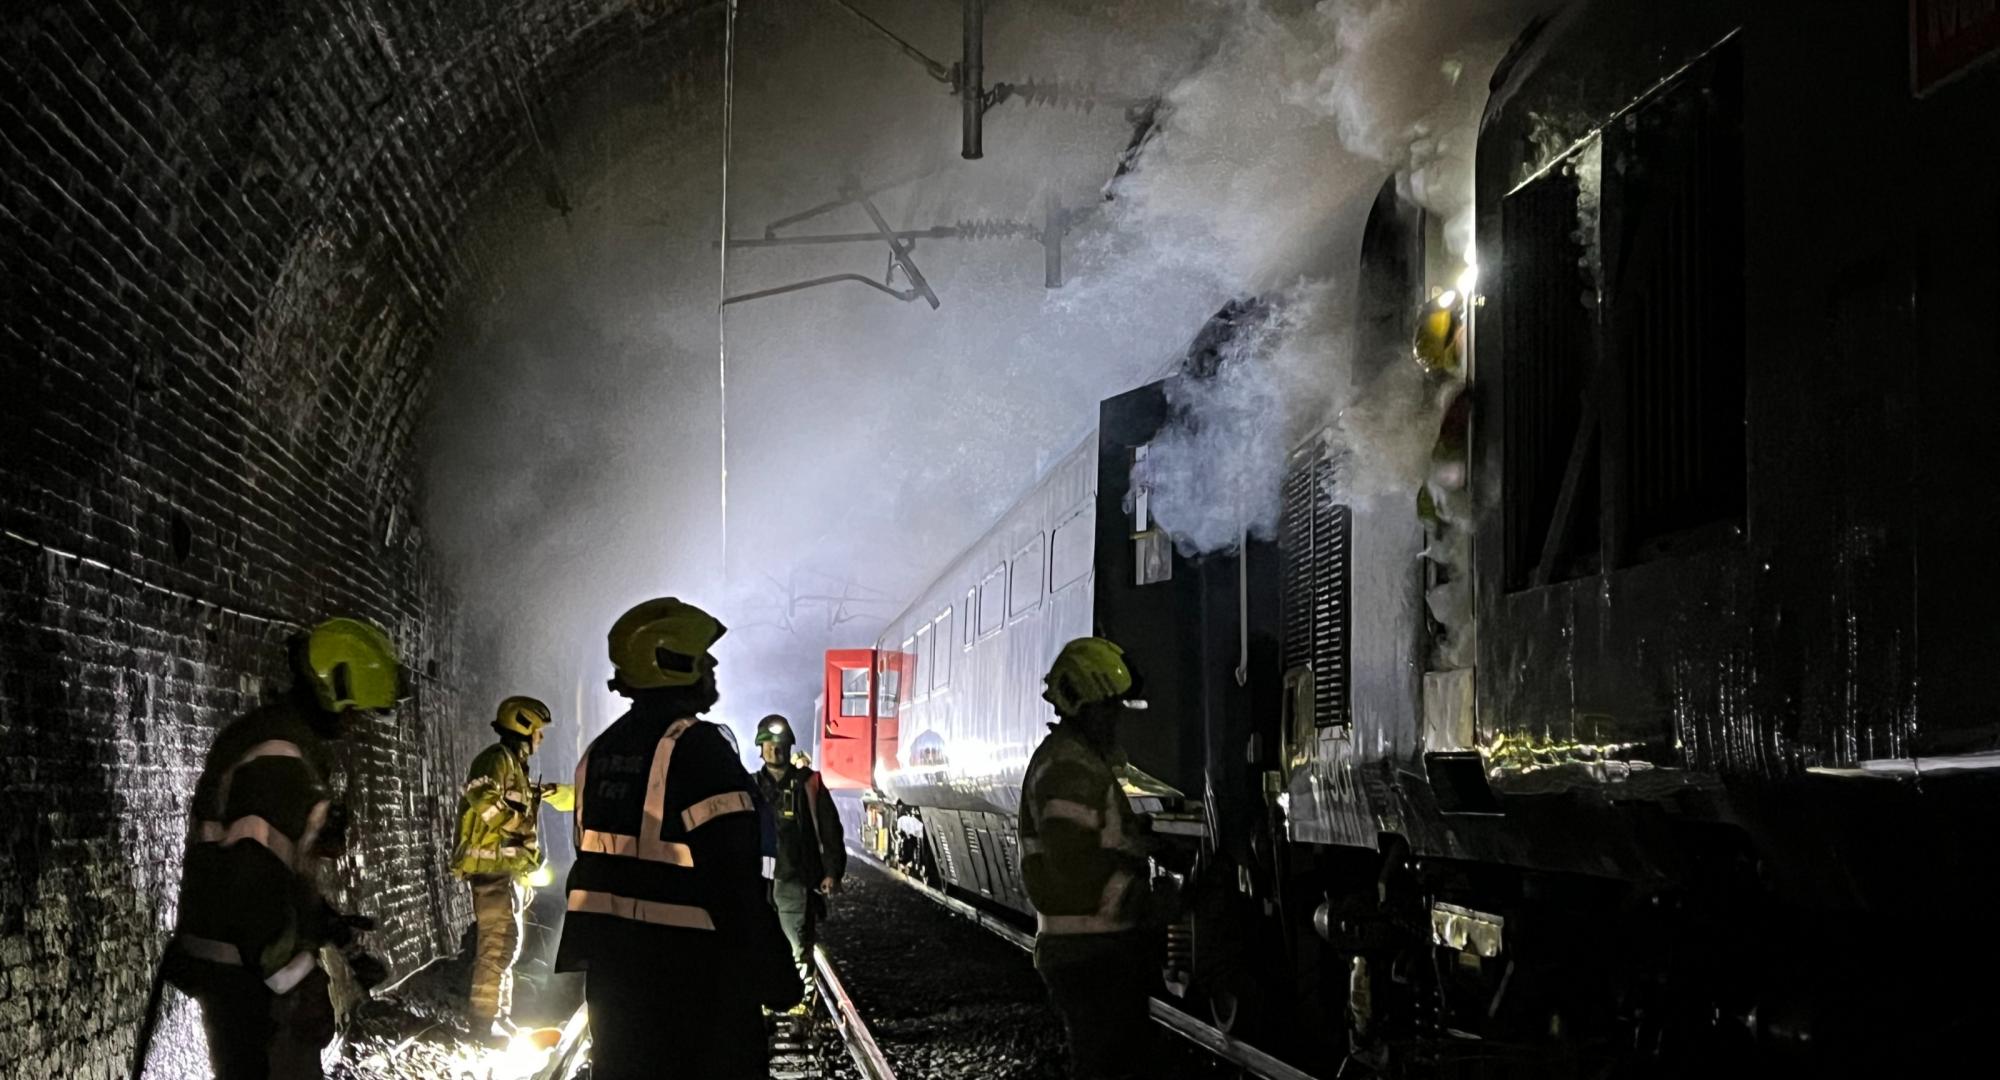 Network Rail image of emergency response training at Sutton Coldfield station in the West Midlands